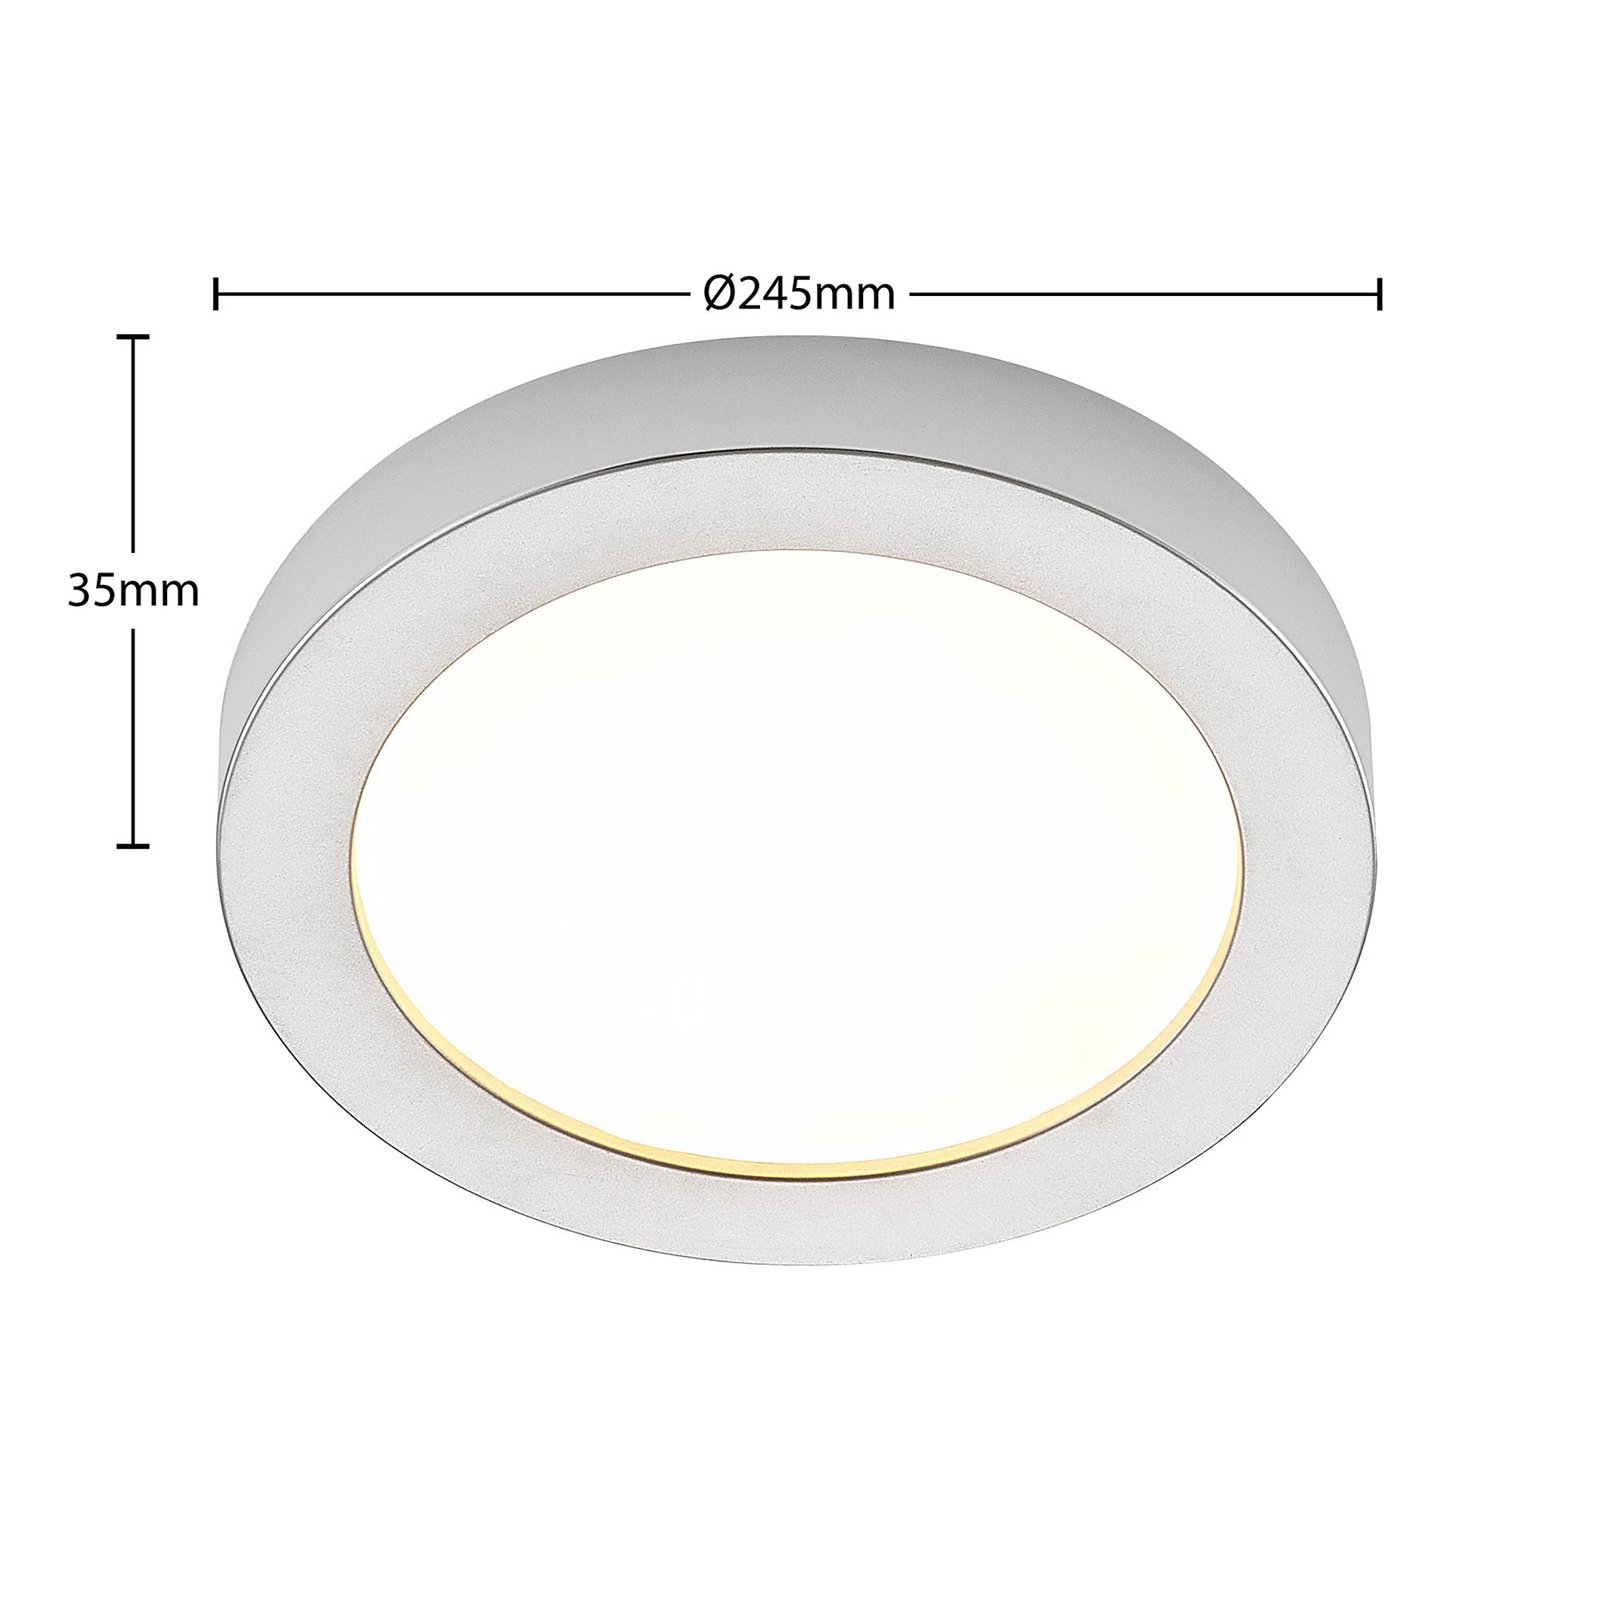 Prios LED ceiling light Edwina, silver, 24.5cm, 2pcs, dimmable